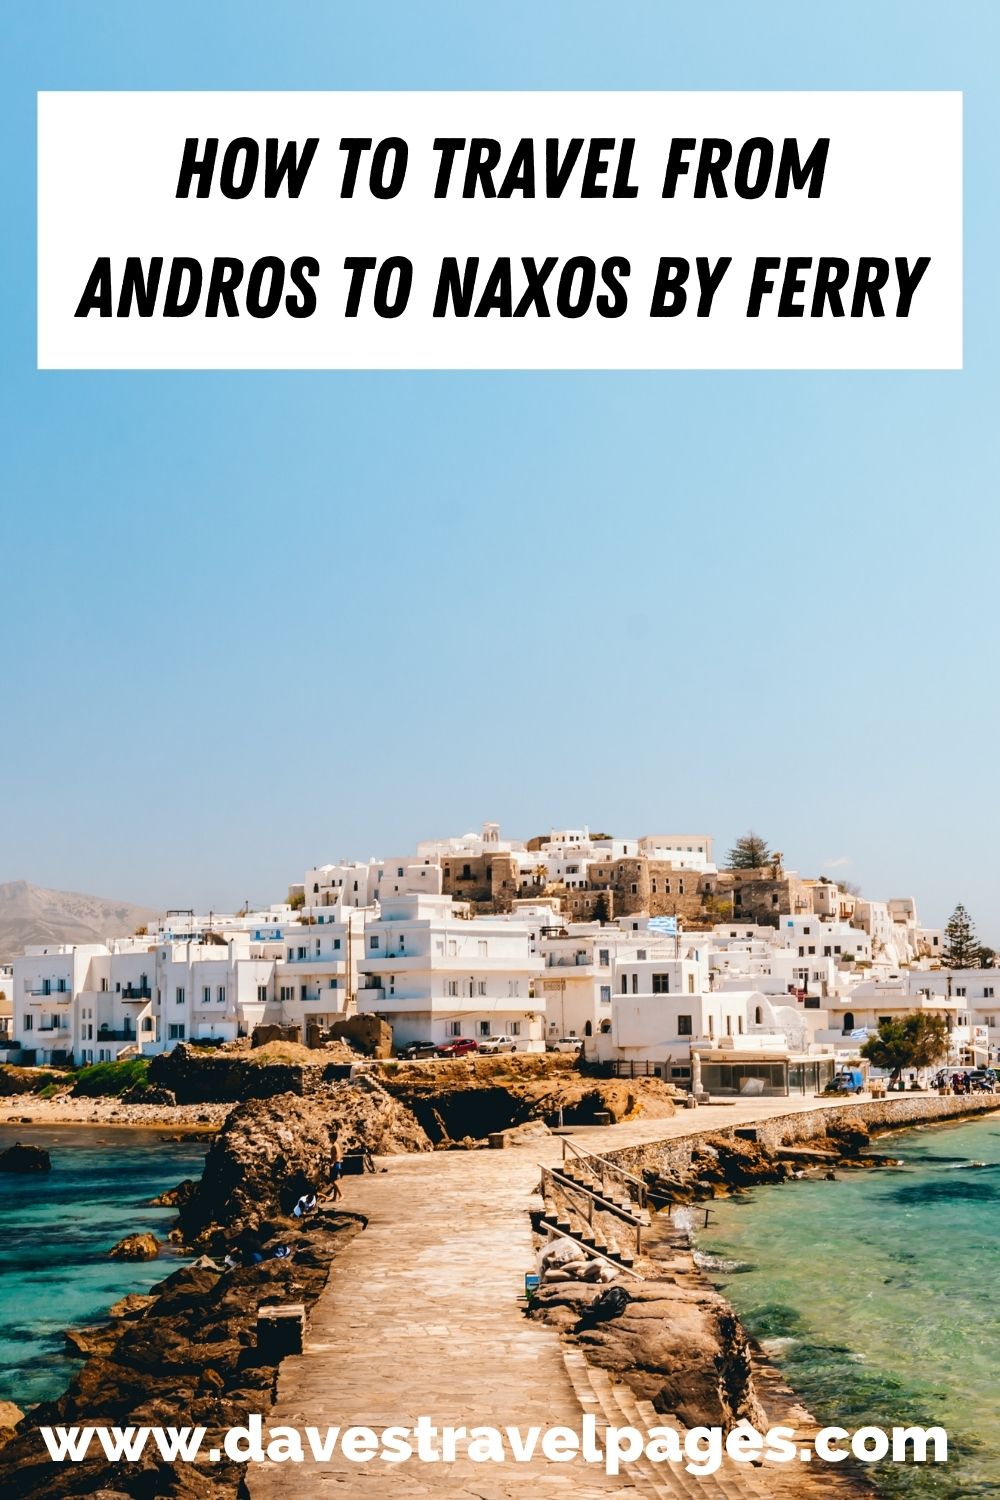 Traveling from Andros to Naxos by ferry in Greece